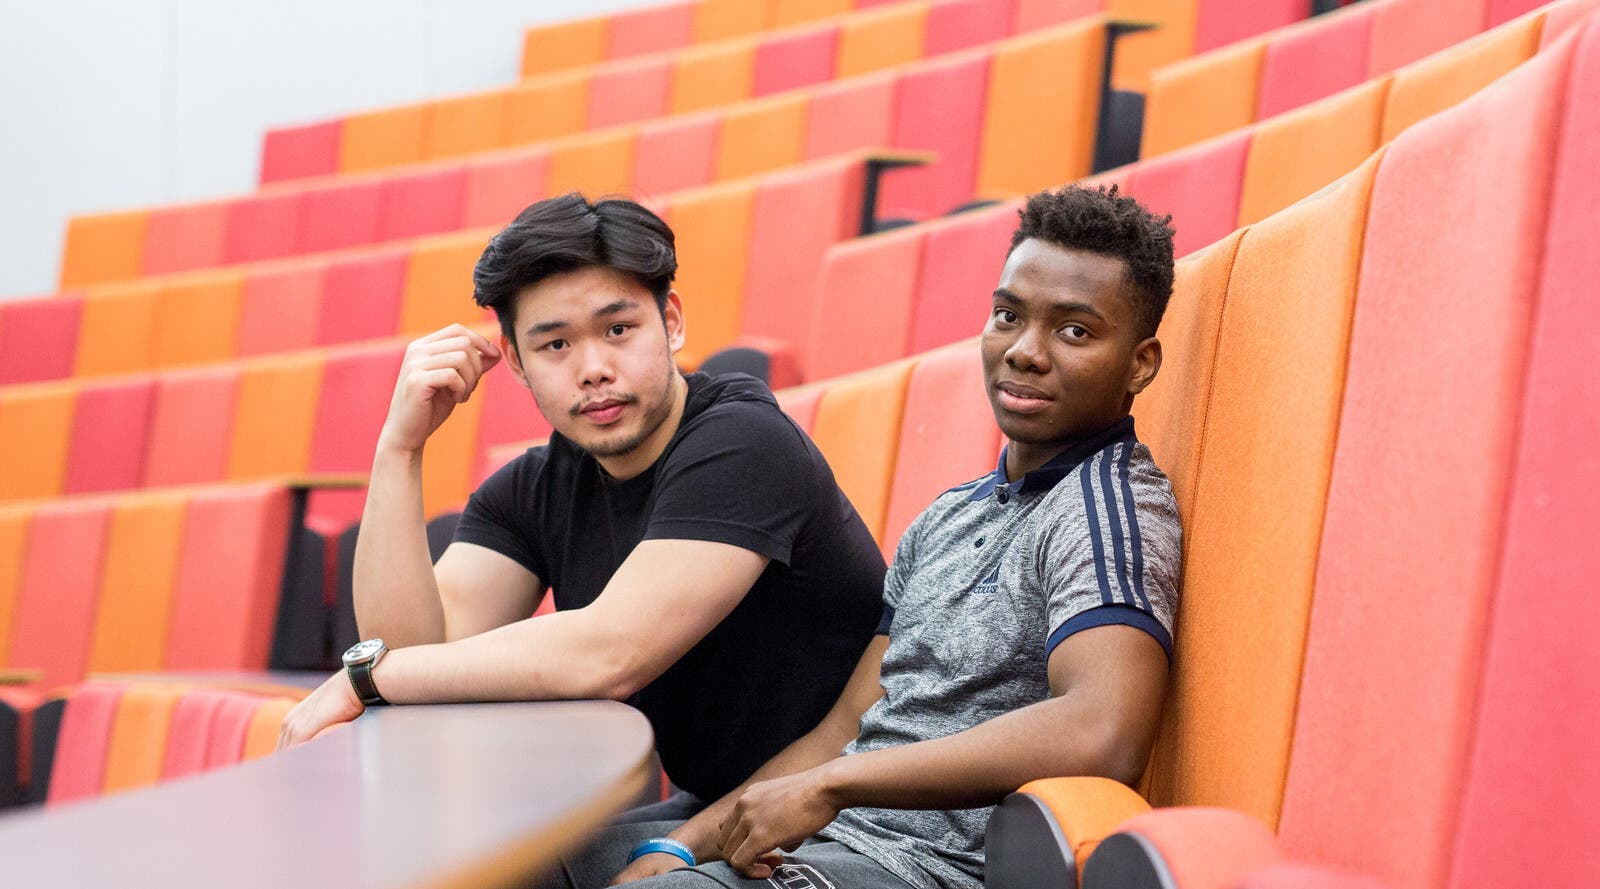 Students sitting on lecture hall seats